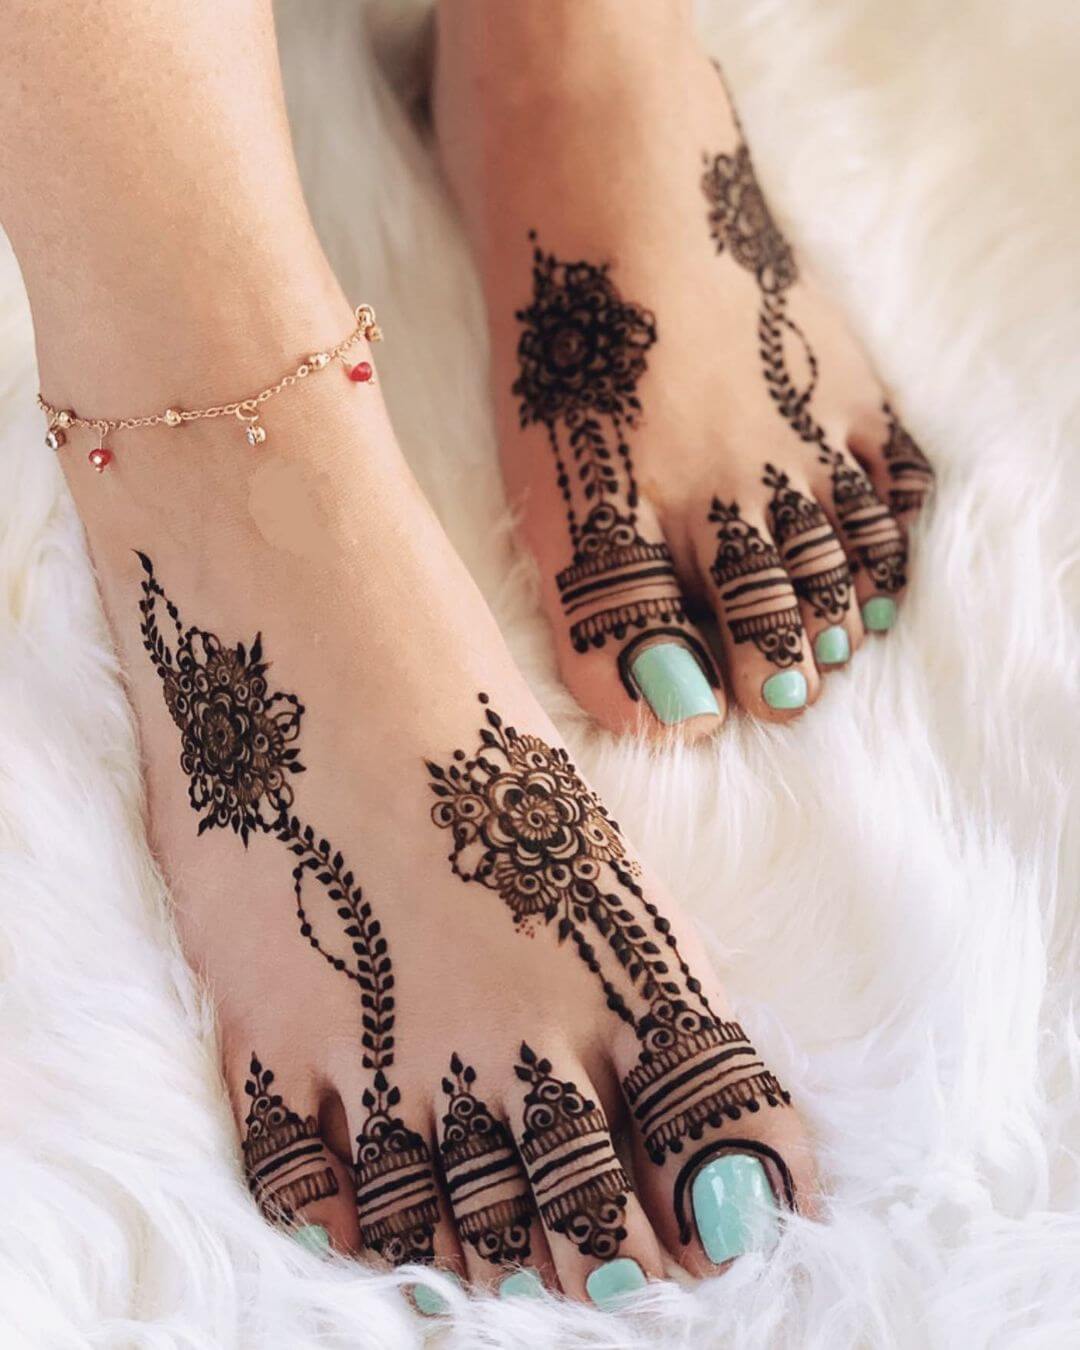 Indian Bridal (Dulhan) Mehndi Designs For Legs OFF THE WALL THE BRANCHES FALL